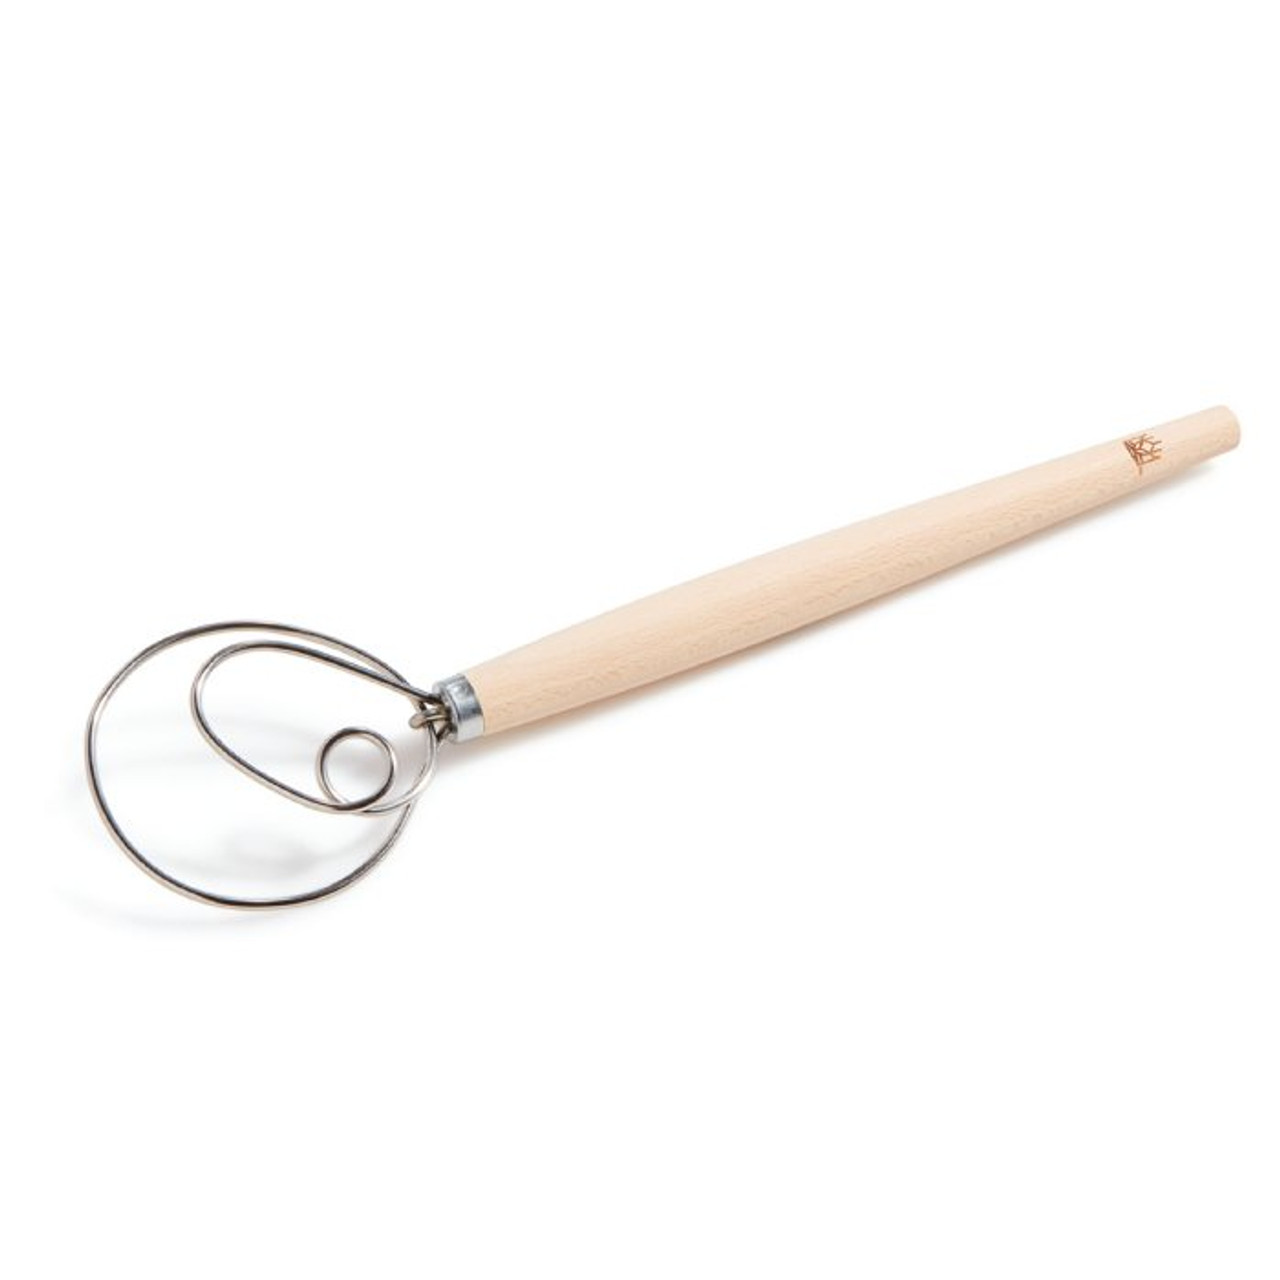 Shop :: Spoon & Whisk 2022